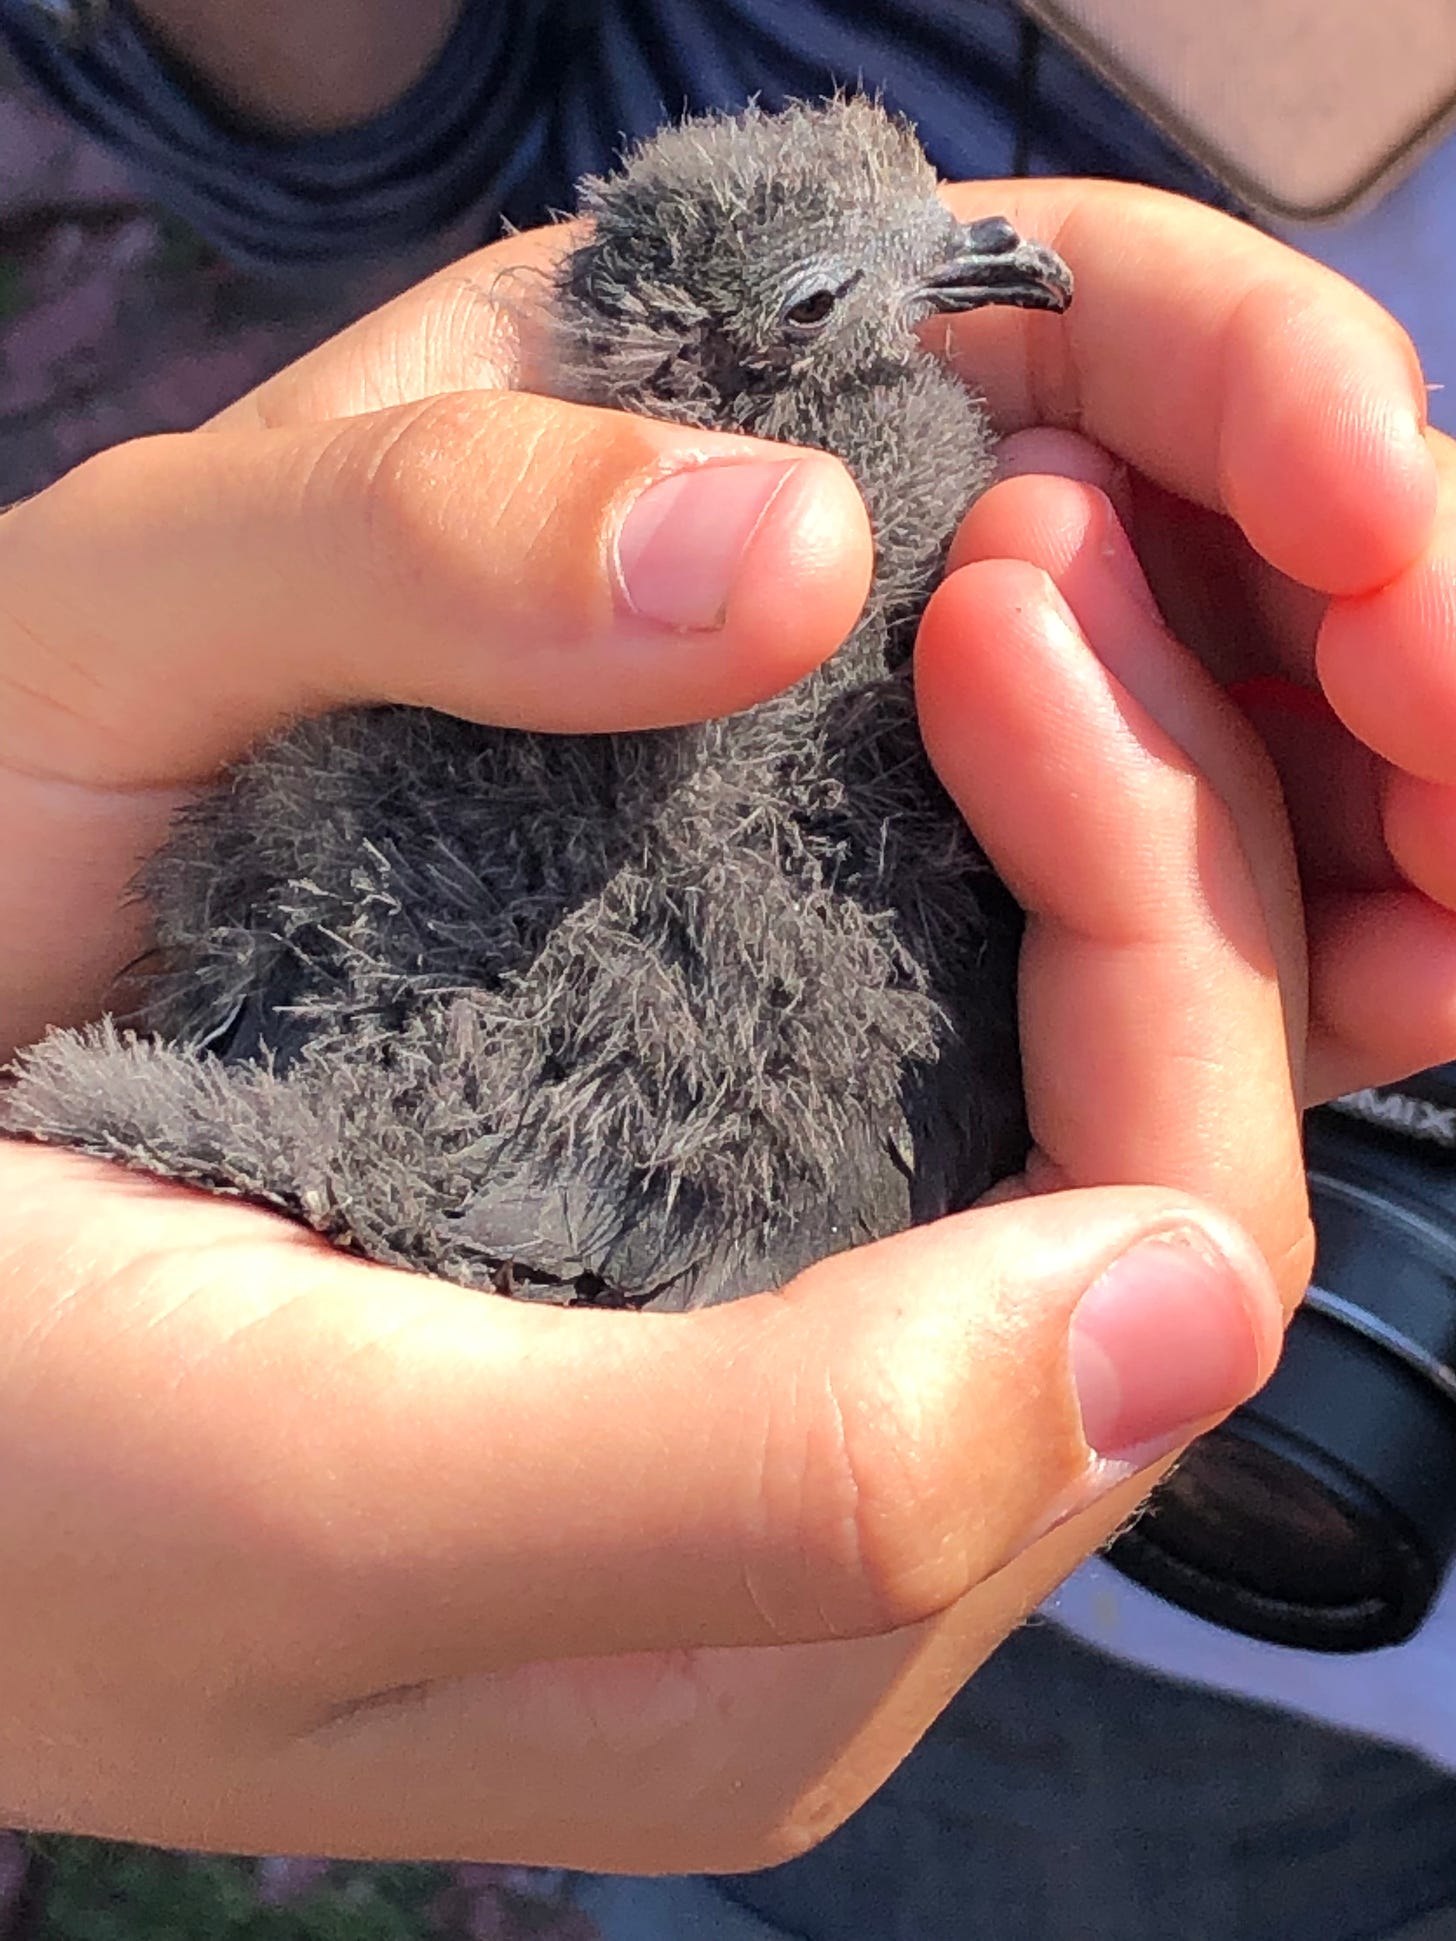 Not actually my hands, but my son's. The storm petrel chick is grey, tiny, fluffy and unbearably cute.